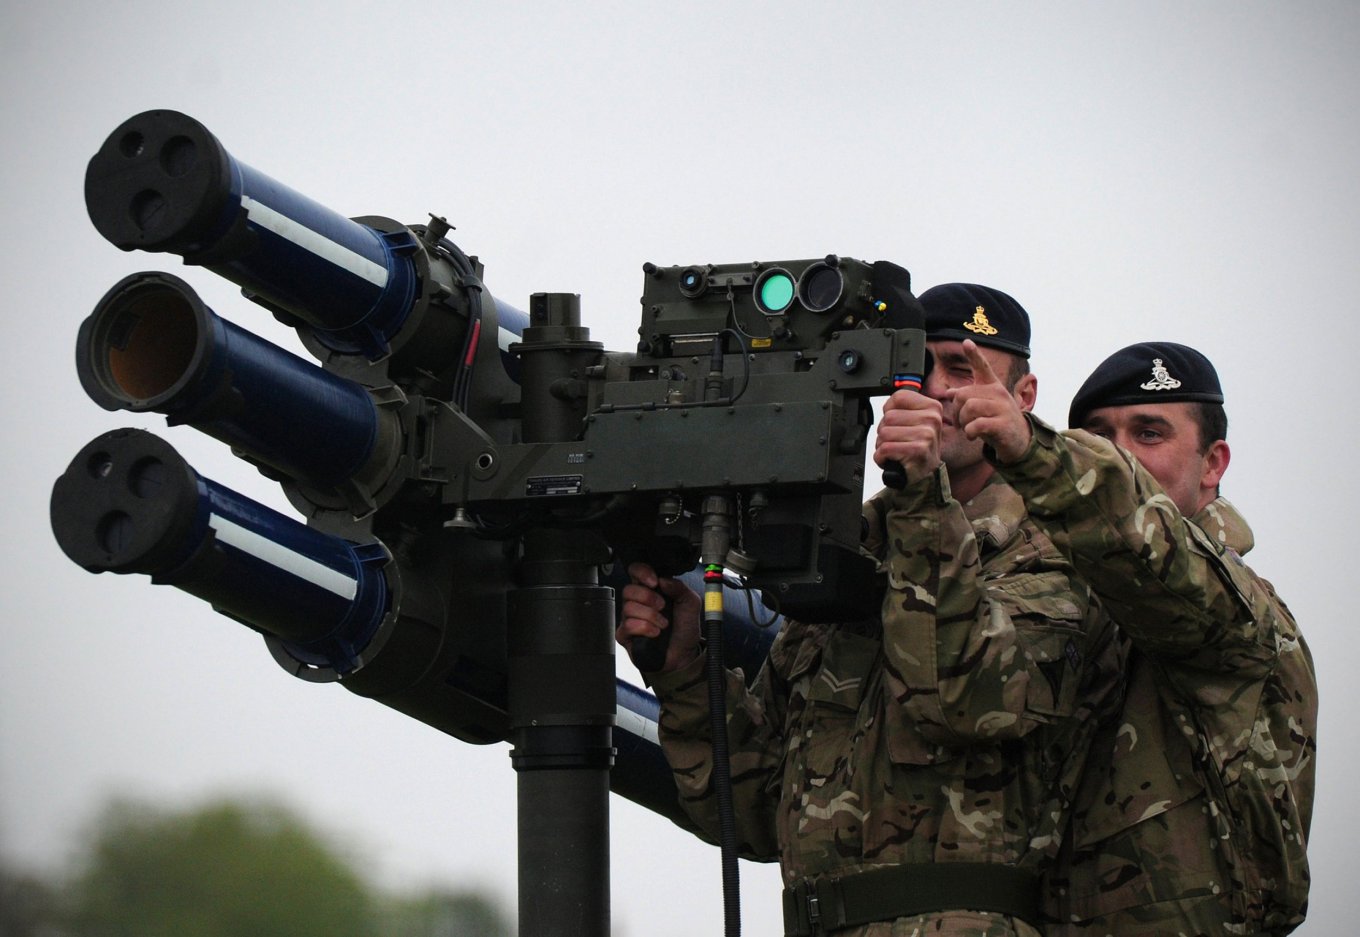 Starstreak is a British short-range man-portable air-defence system (MANPADS) manufactured by Thales Air Defence